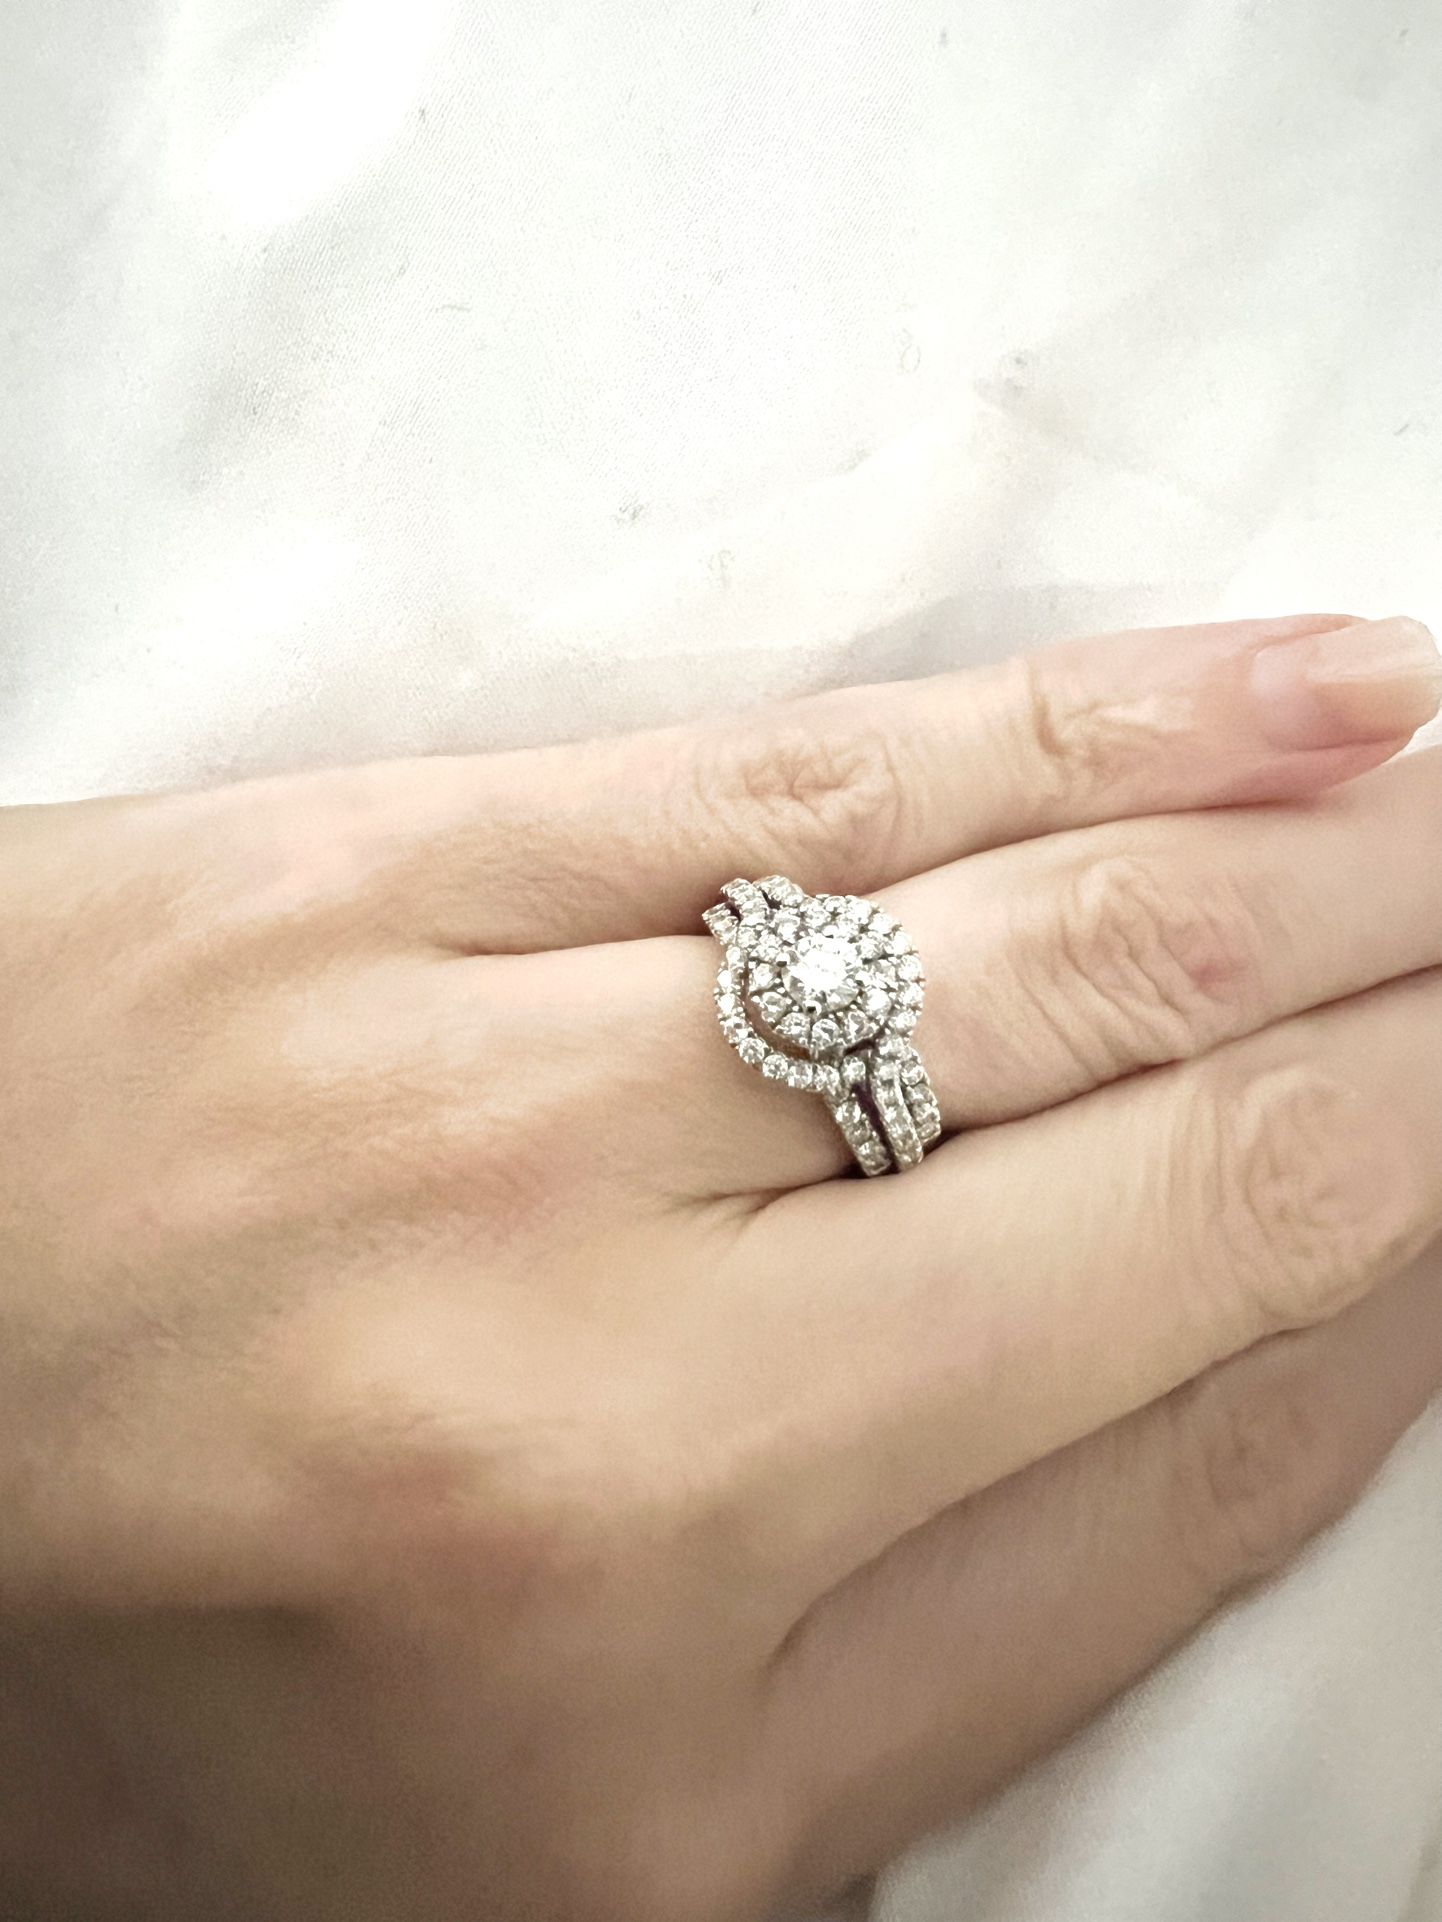 Beautiful Engagement Ring - Less Than A Year Old